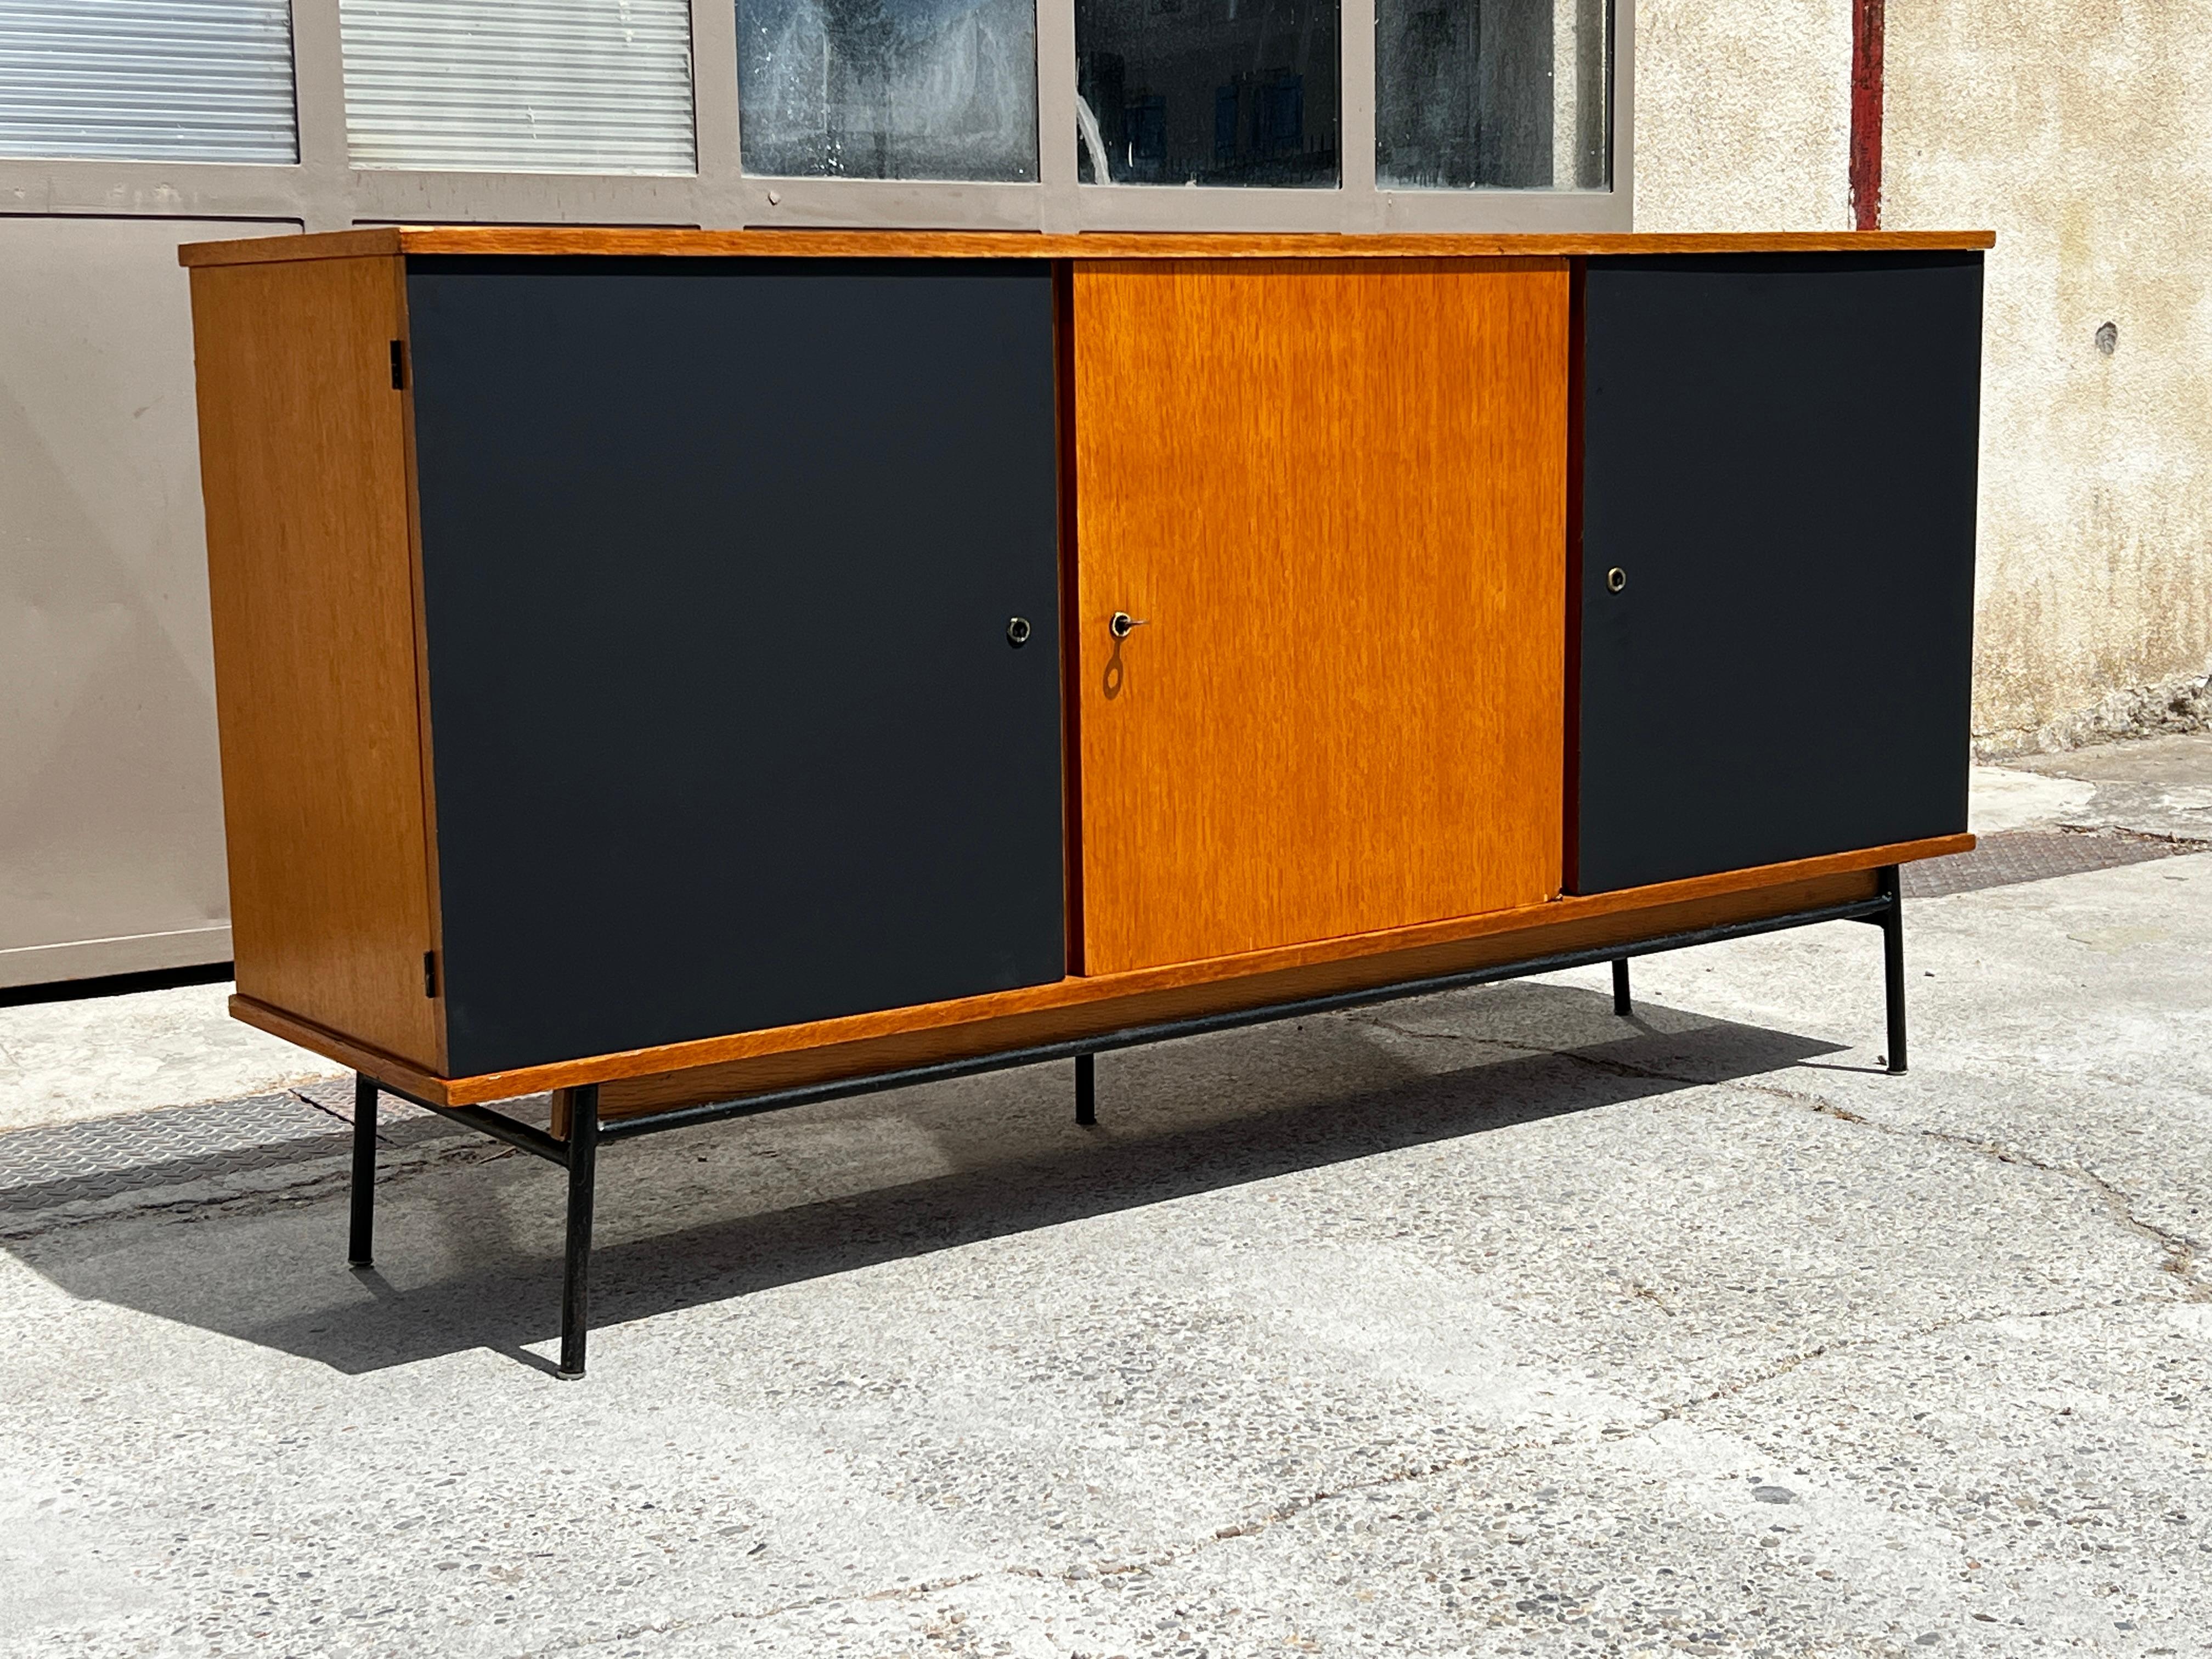 French modernist sideboard albert ducrot for ducal 1950 in blond wood and black mat laminate, with 3 doors. Black metal base. Inside drawers and shelves. Nice workmanship and good condition.